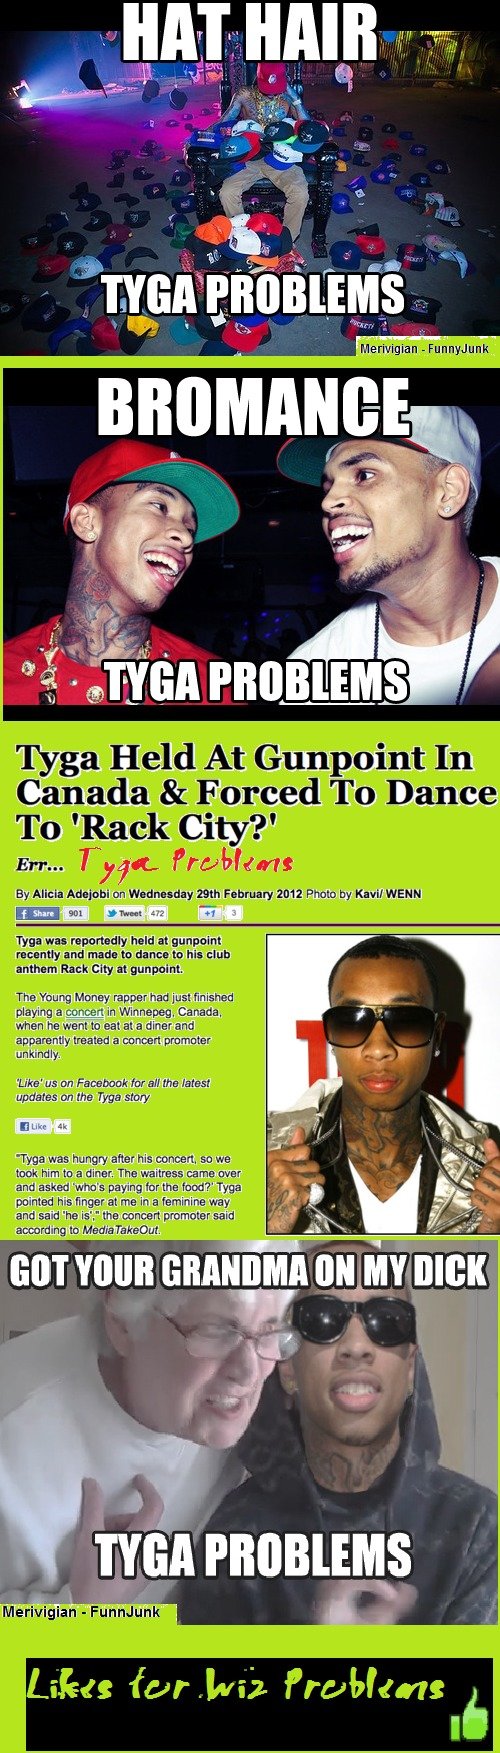 TYGA Problems. 99 problems and grandma's one of them. tti lair ! ail' d till) fft 4 sin & Tyga Held At In Canada 81 Forced To Dance Rack City?‘ ta Alicia an Wed